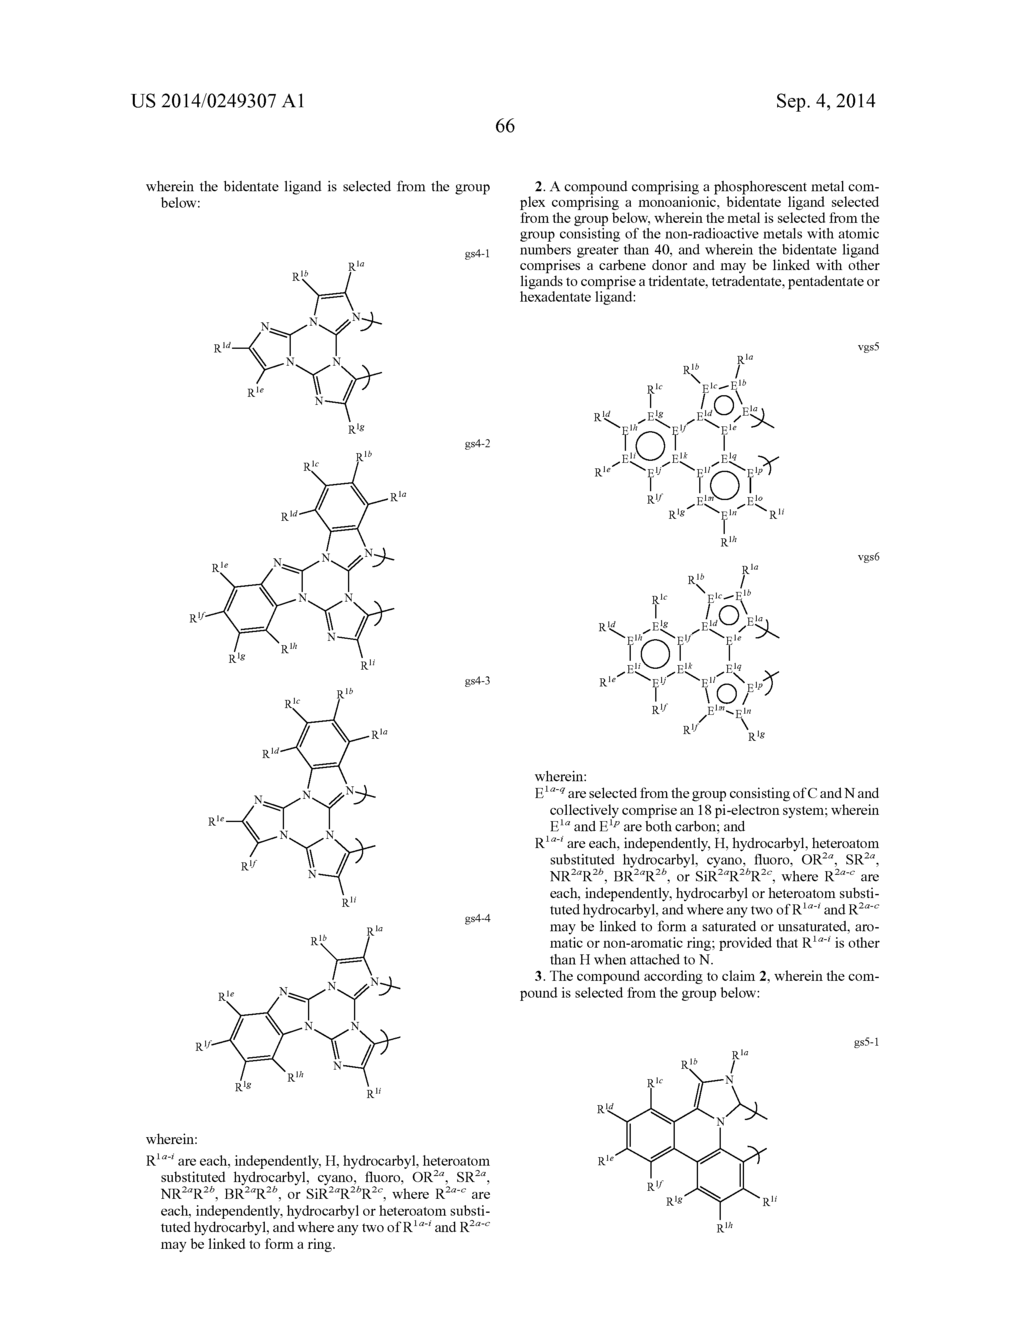 METAL COMPLEXES OF CYCLOMETALLATED IMIDAZO[1,2-f]PHENANTHRIDINE AND     DIIMIDAZO[1,2-a:1',2'-c]QUINAZOLINE LIGANDS AND ISOELECTRONIC AND     BENZANNULATED ANALOGS THEREOF - diagram, schematic, and image 84